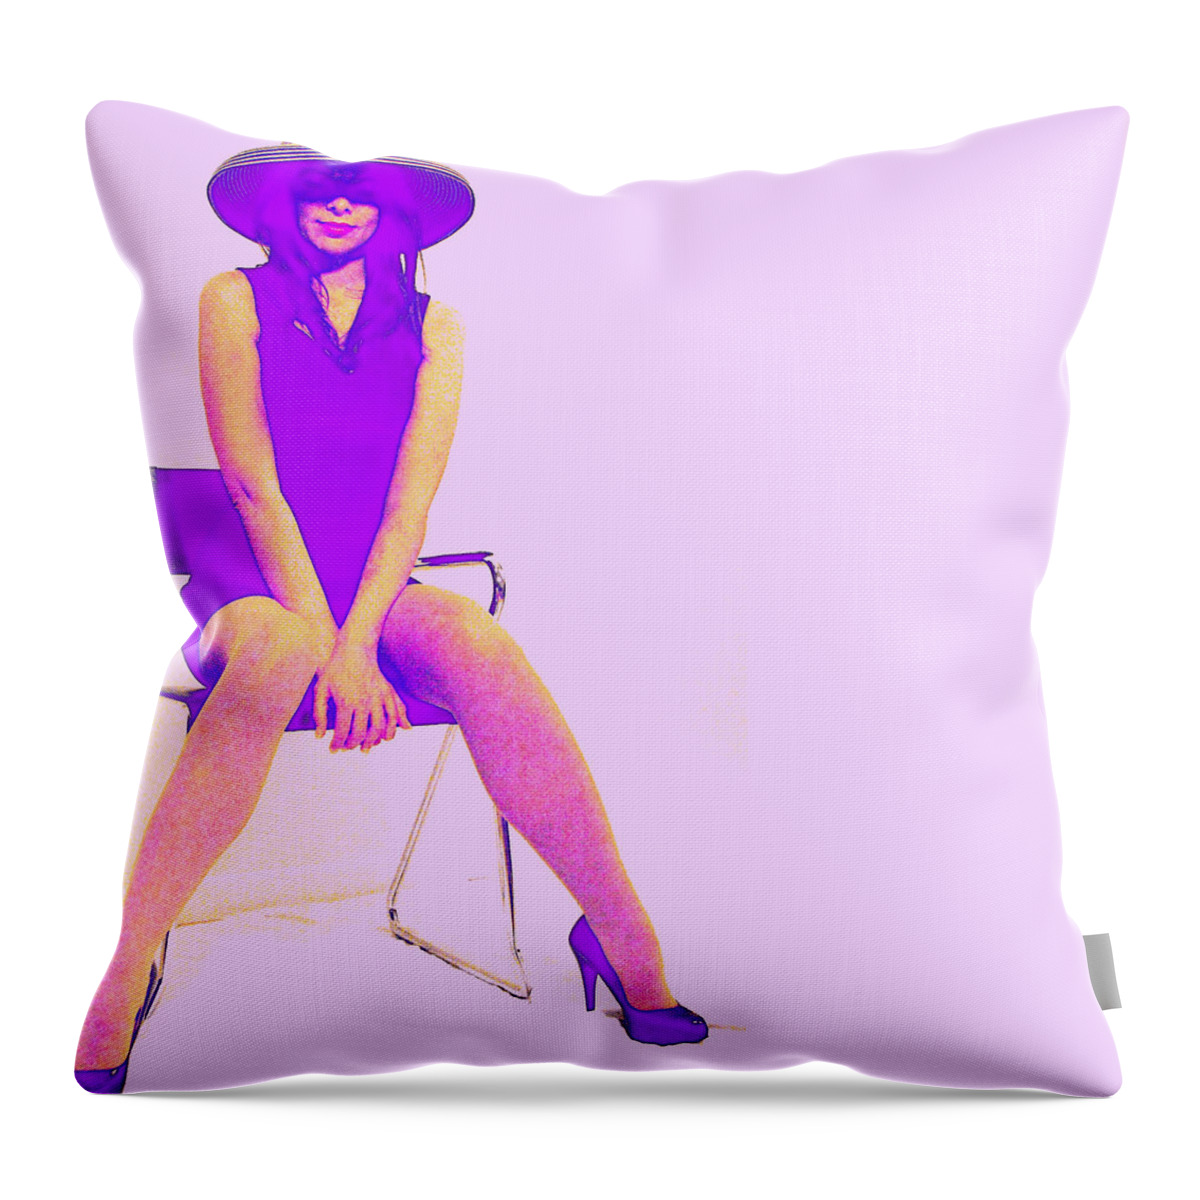 Vogue Throw Pillow featuring the painting Niki by Naxart Studio